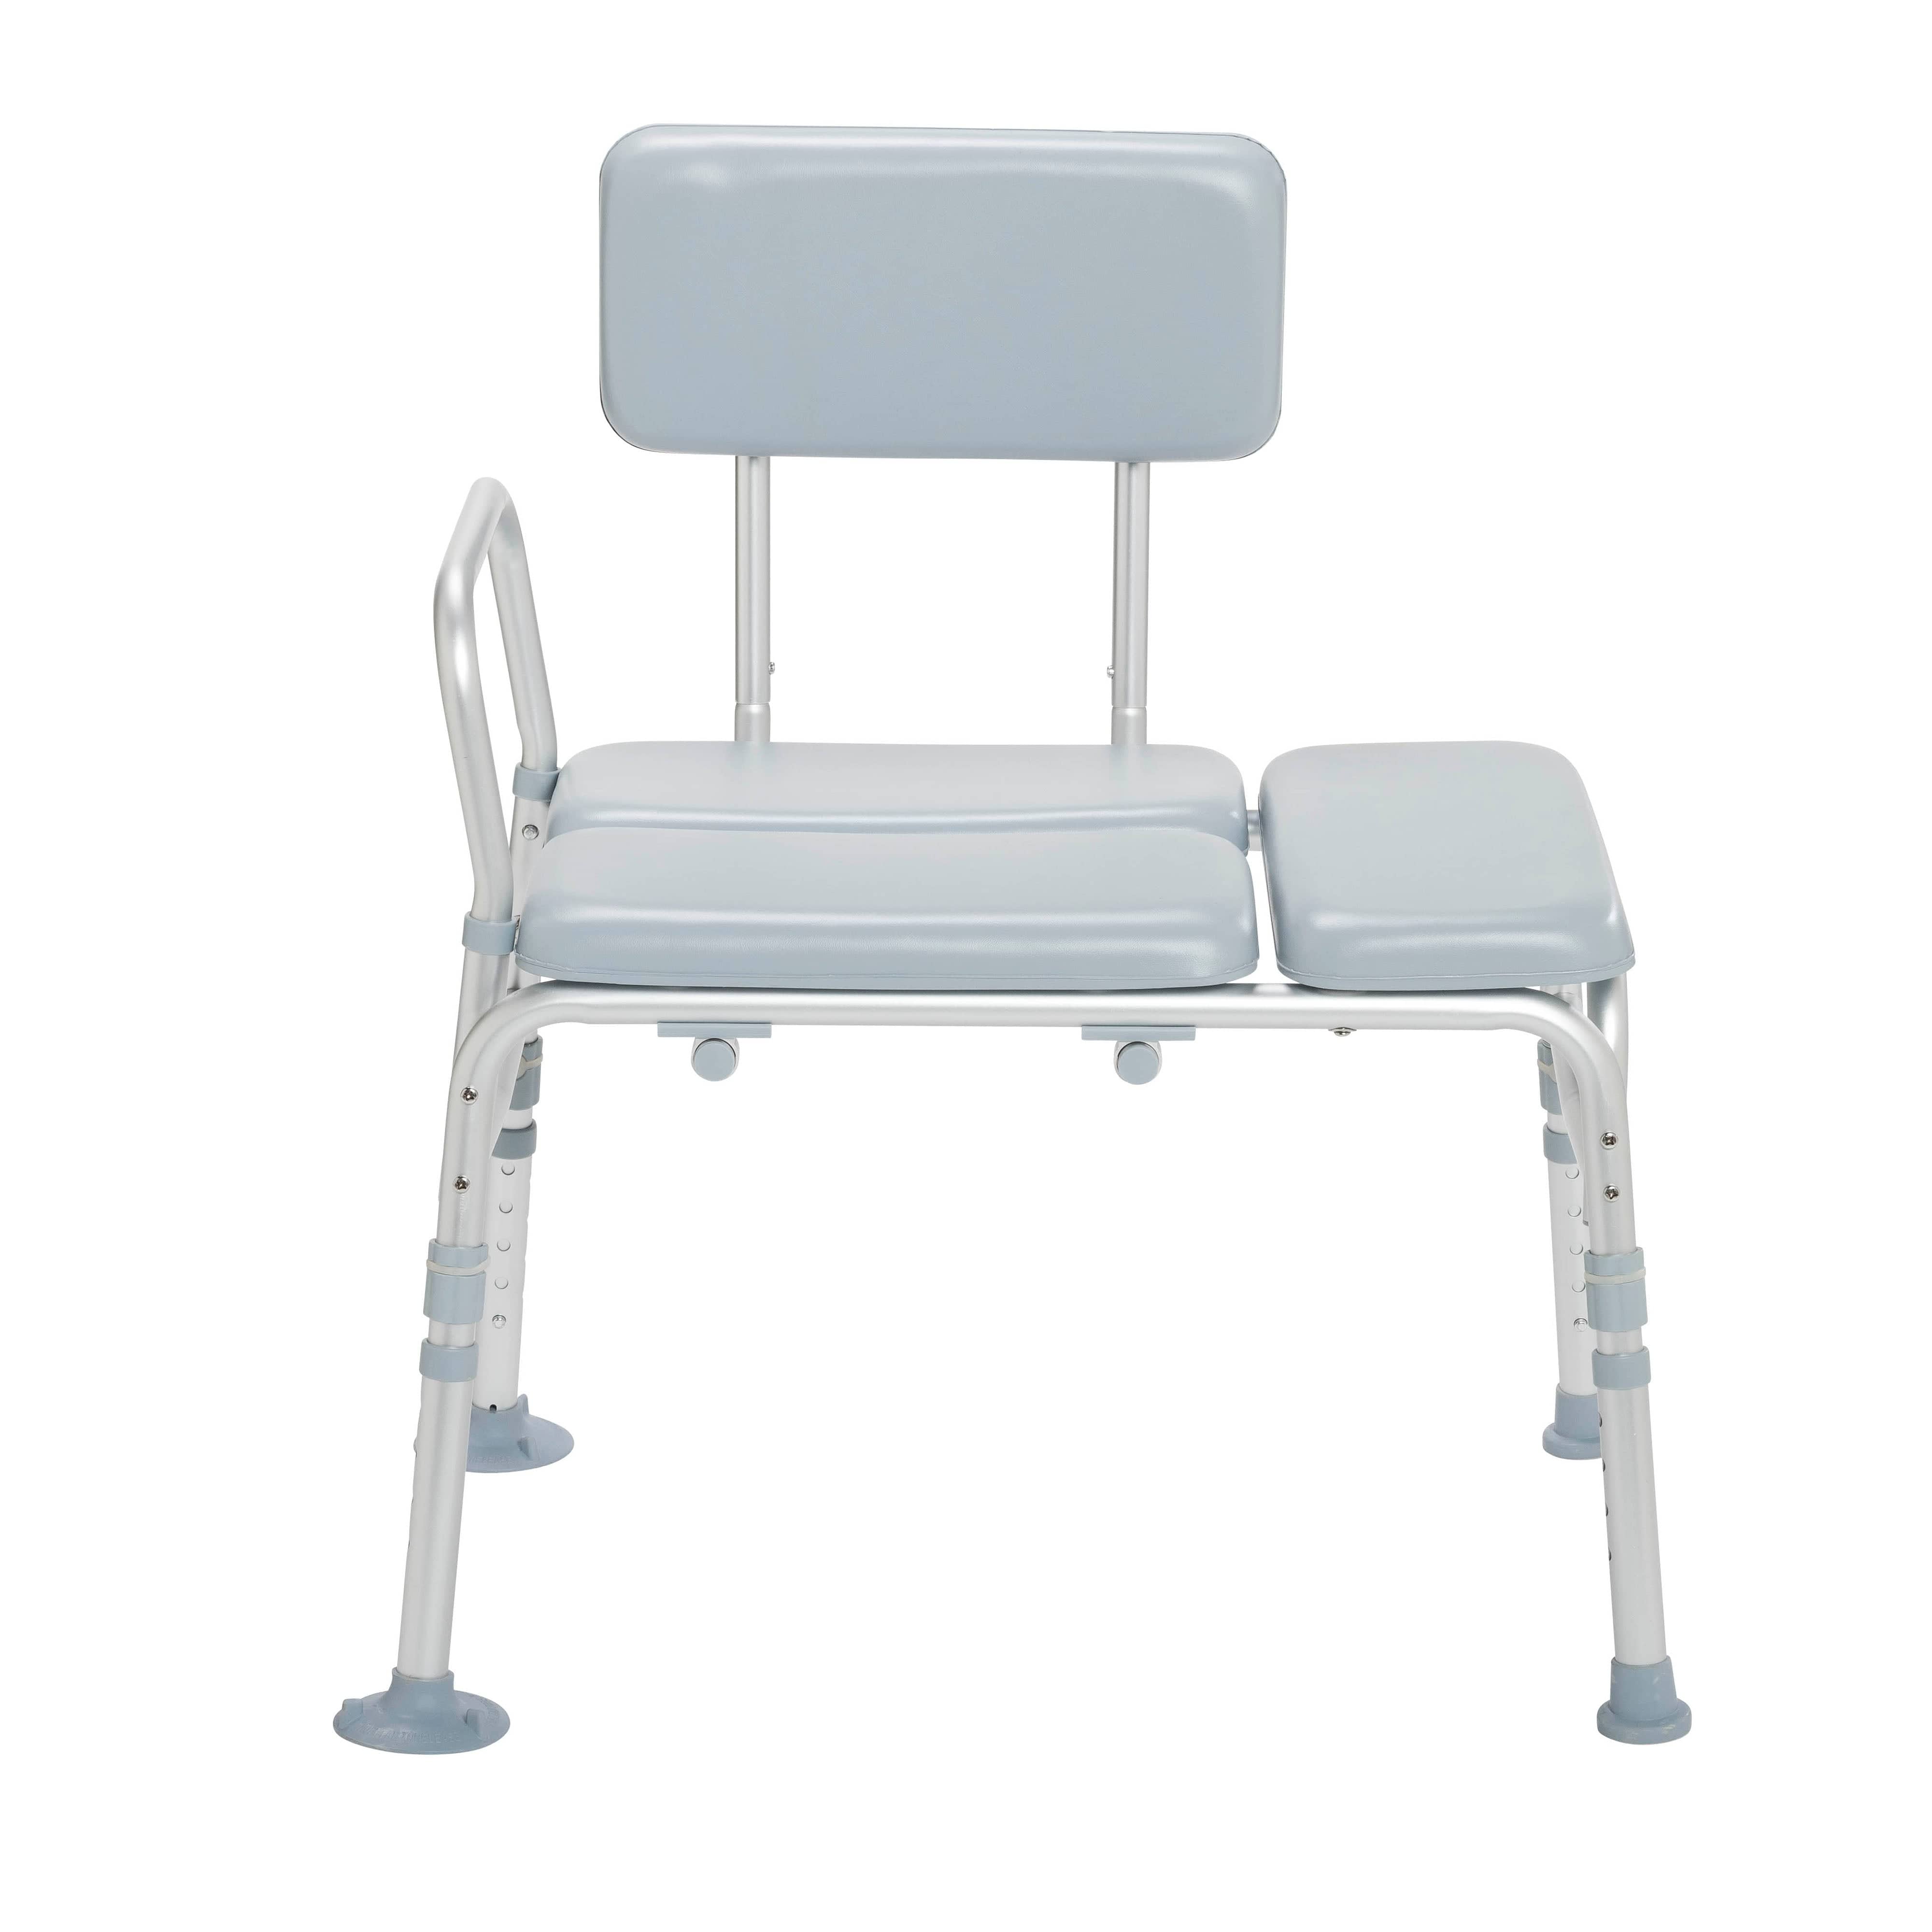 Drive Medical Drive Medical Padded Seat Transfer Bench 12005kd-1